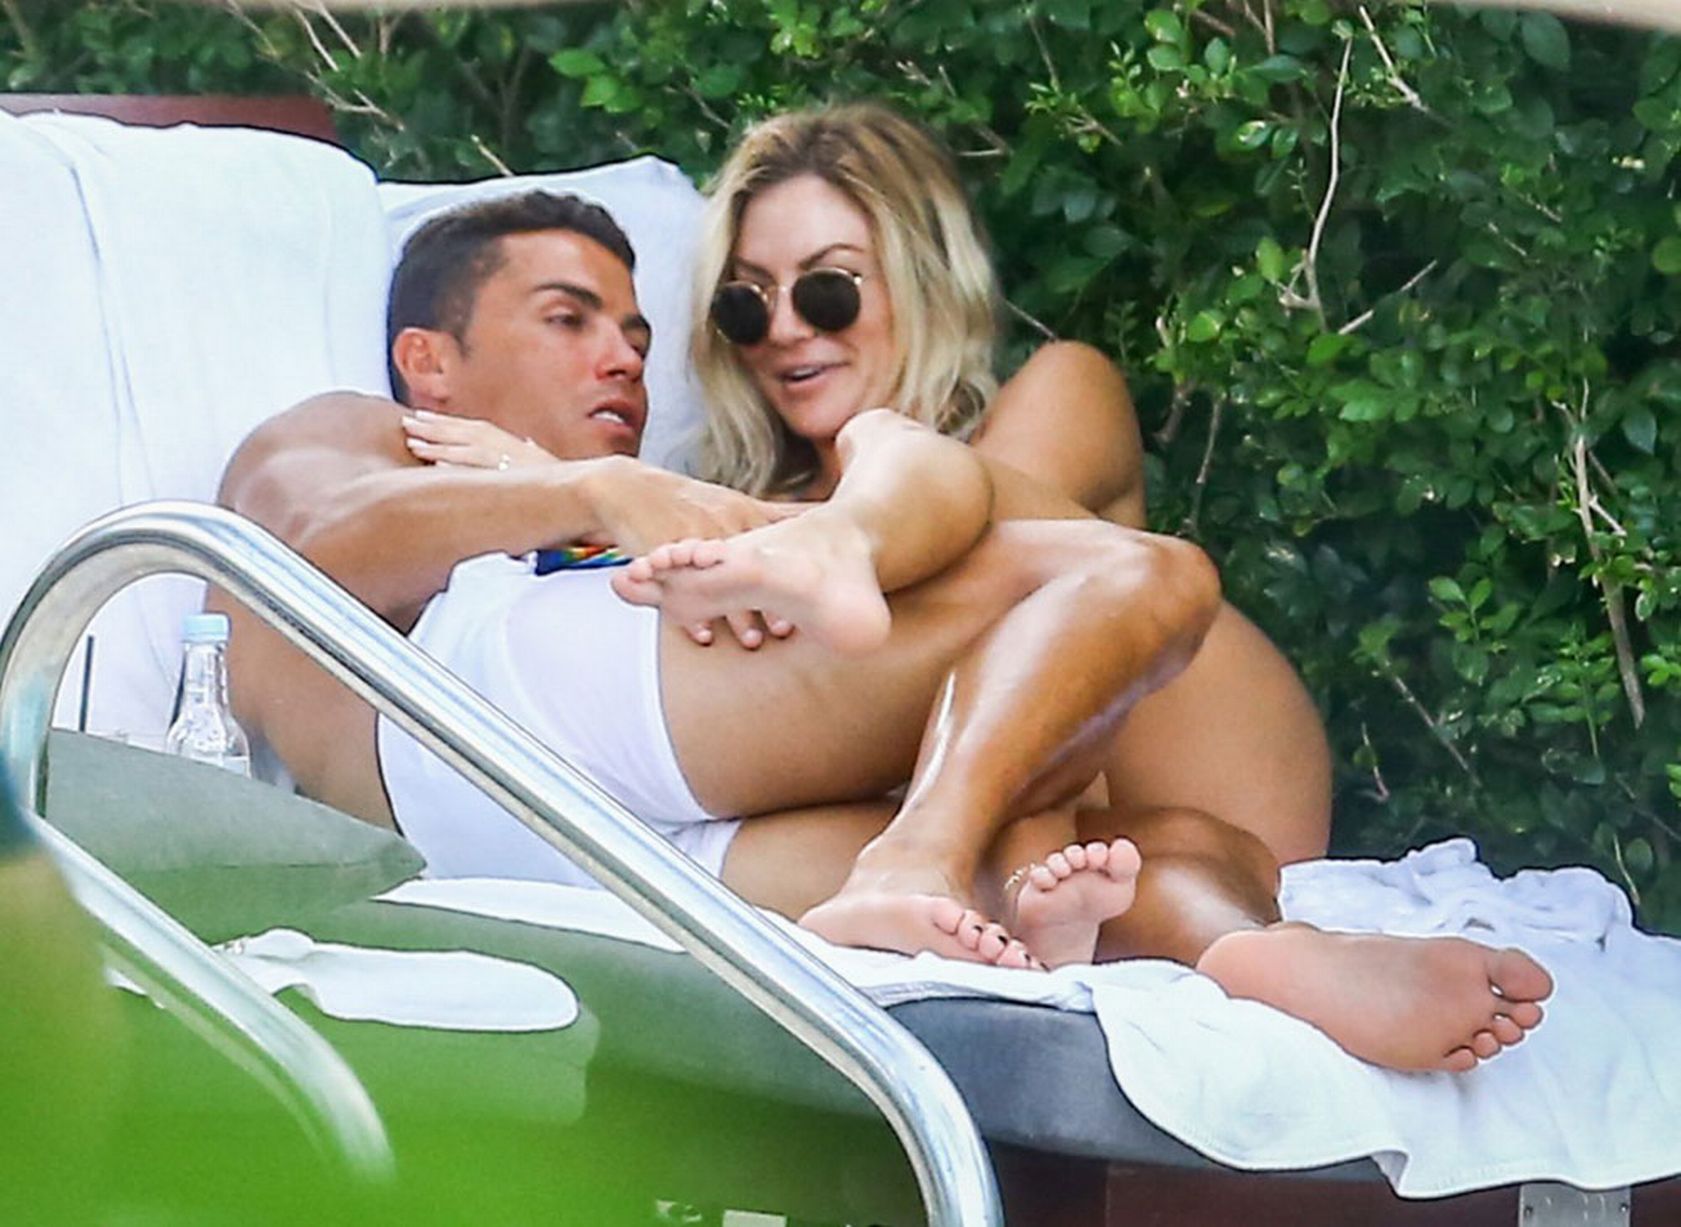 PAY-Cristiano-Ronaldo-is-spotted-getting-very-close-and-personal-with-Cassandra-Davis (9)